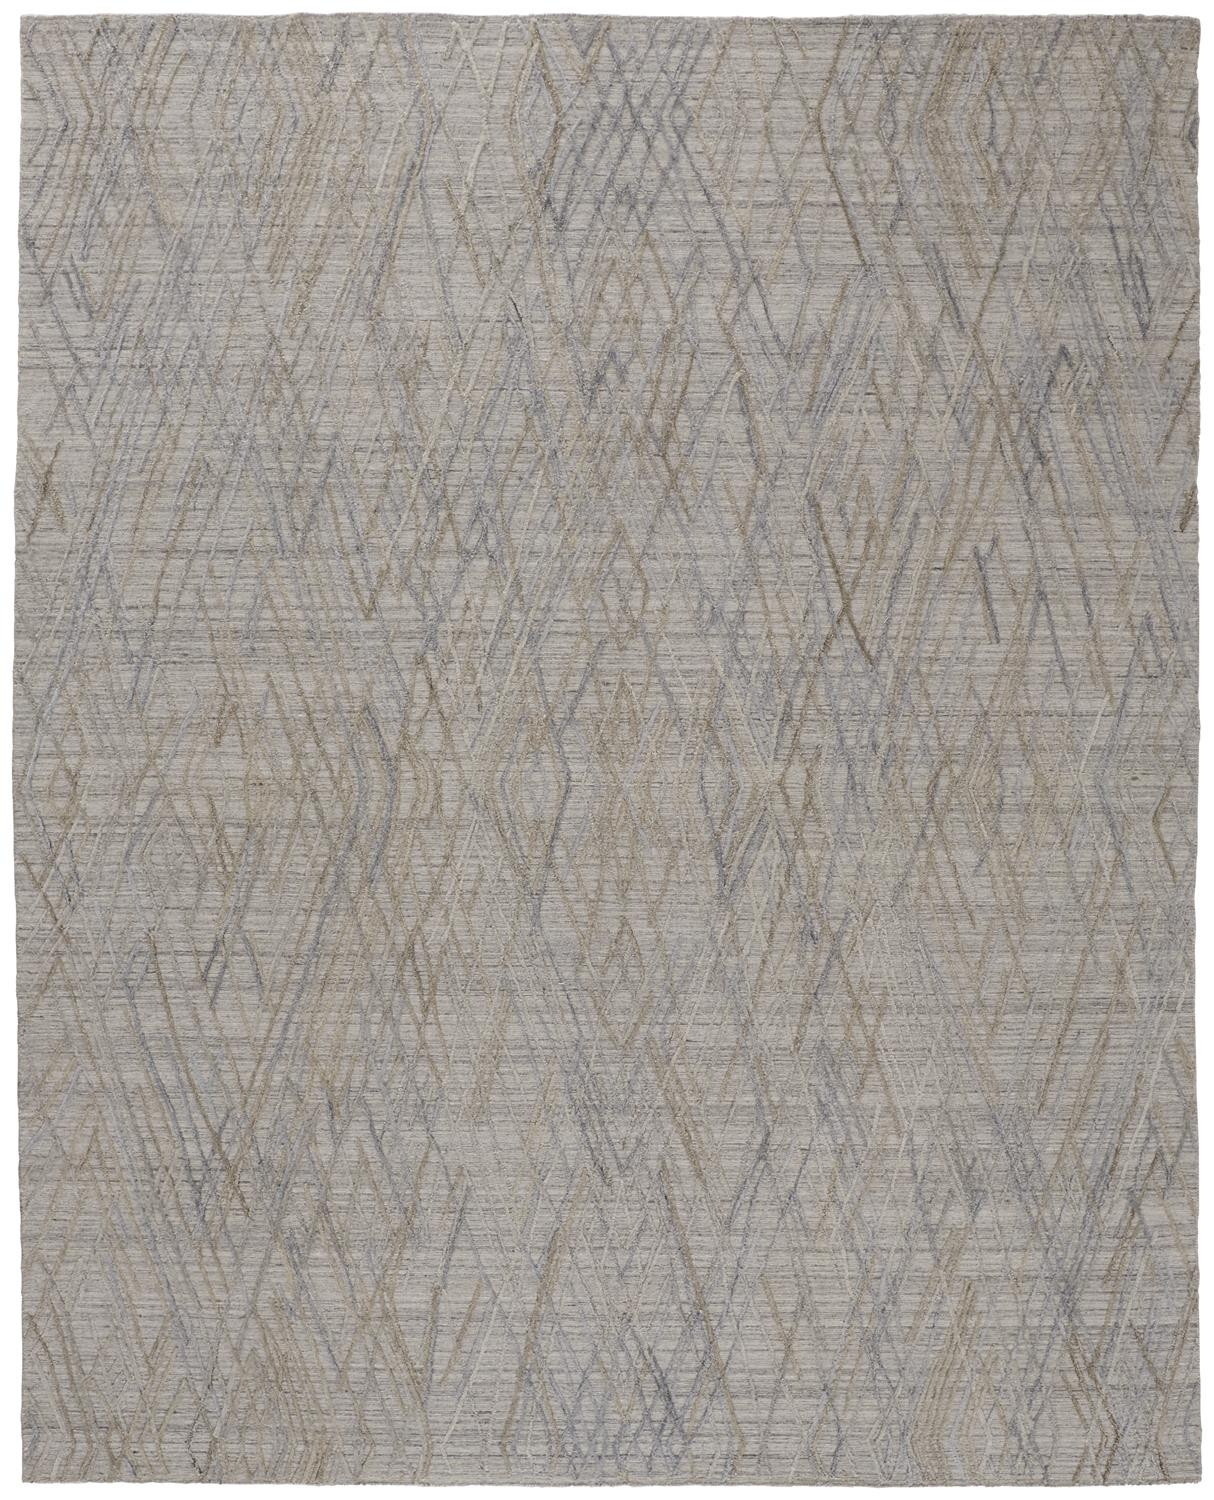 2' X 3' Gray And Blue Abstract Hand Woven Area Rug-513552-1